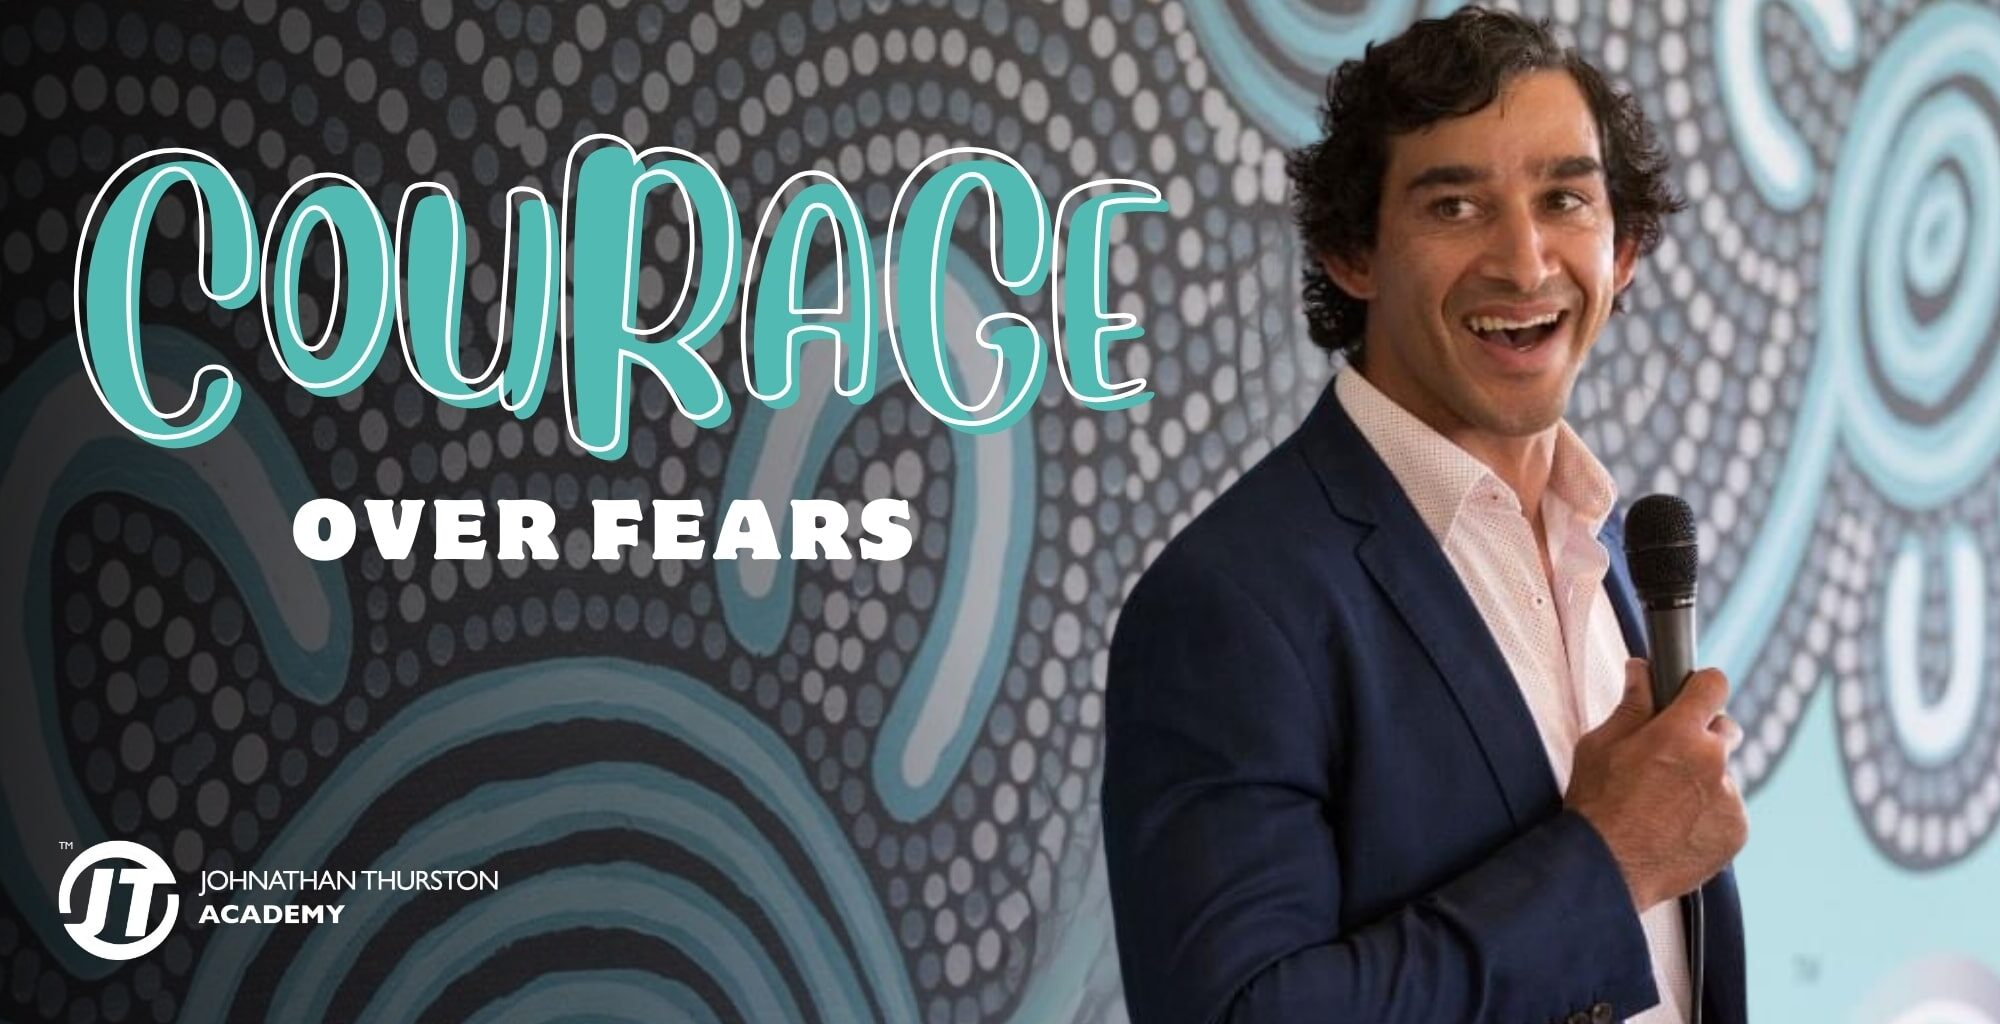 Courage Over Fears